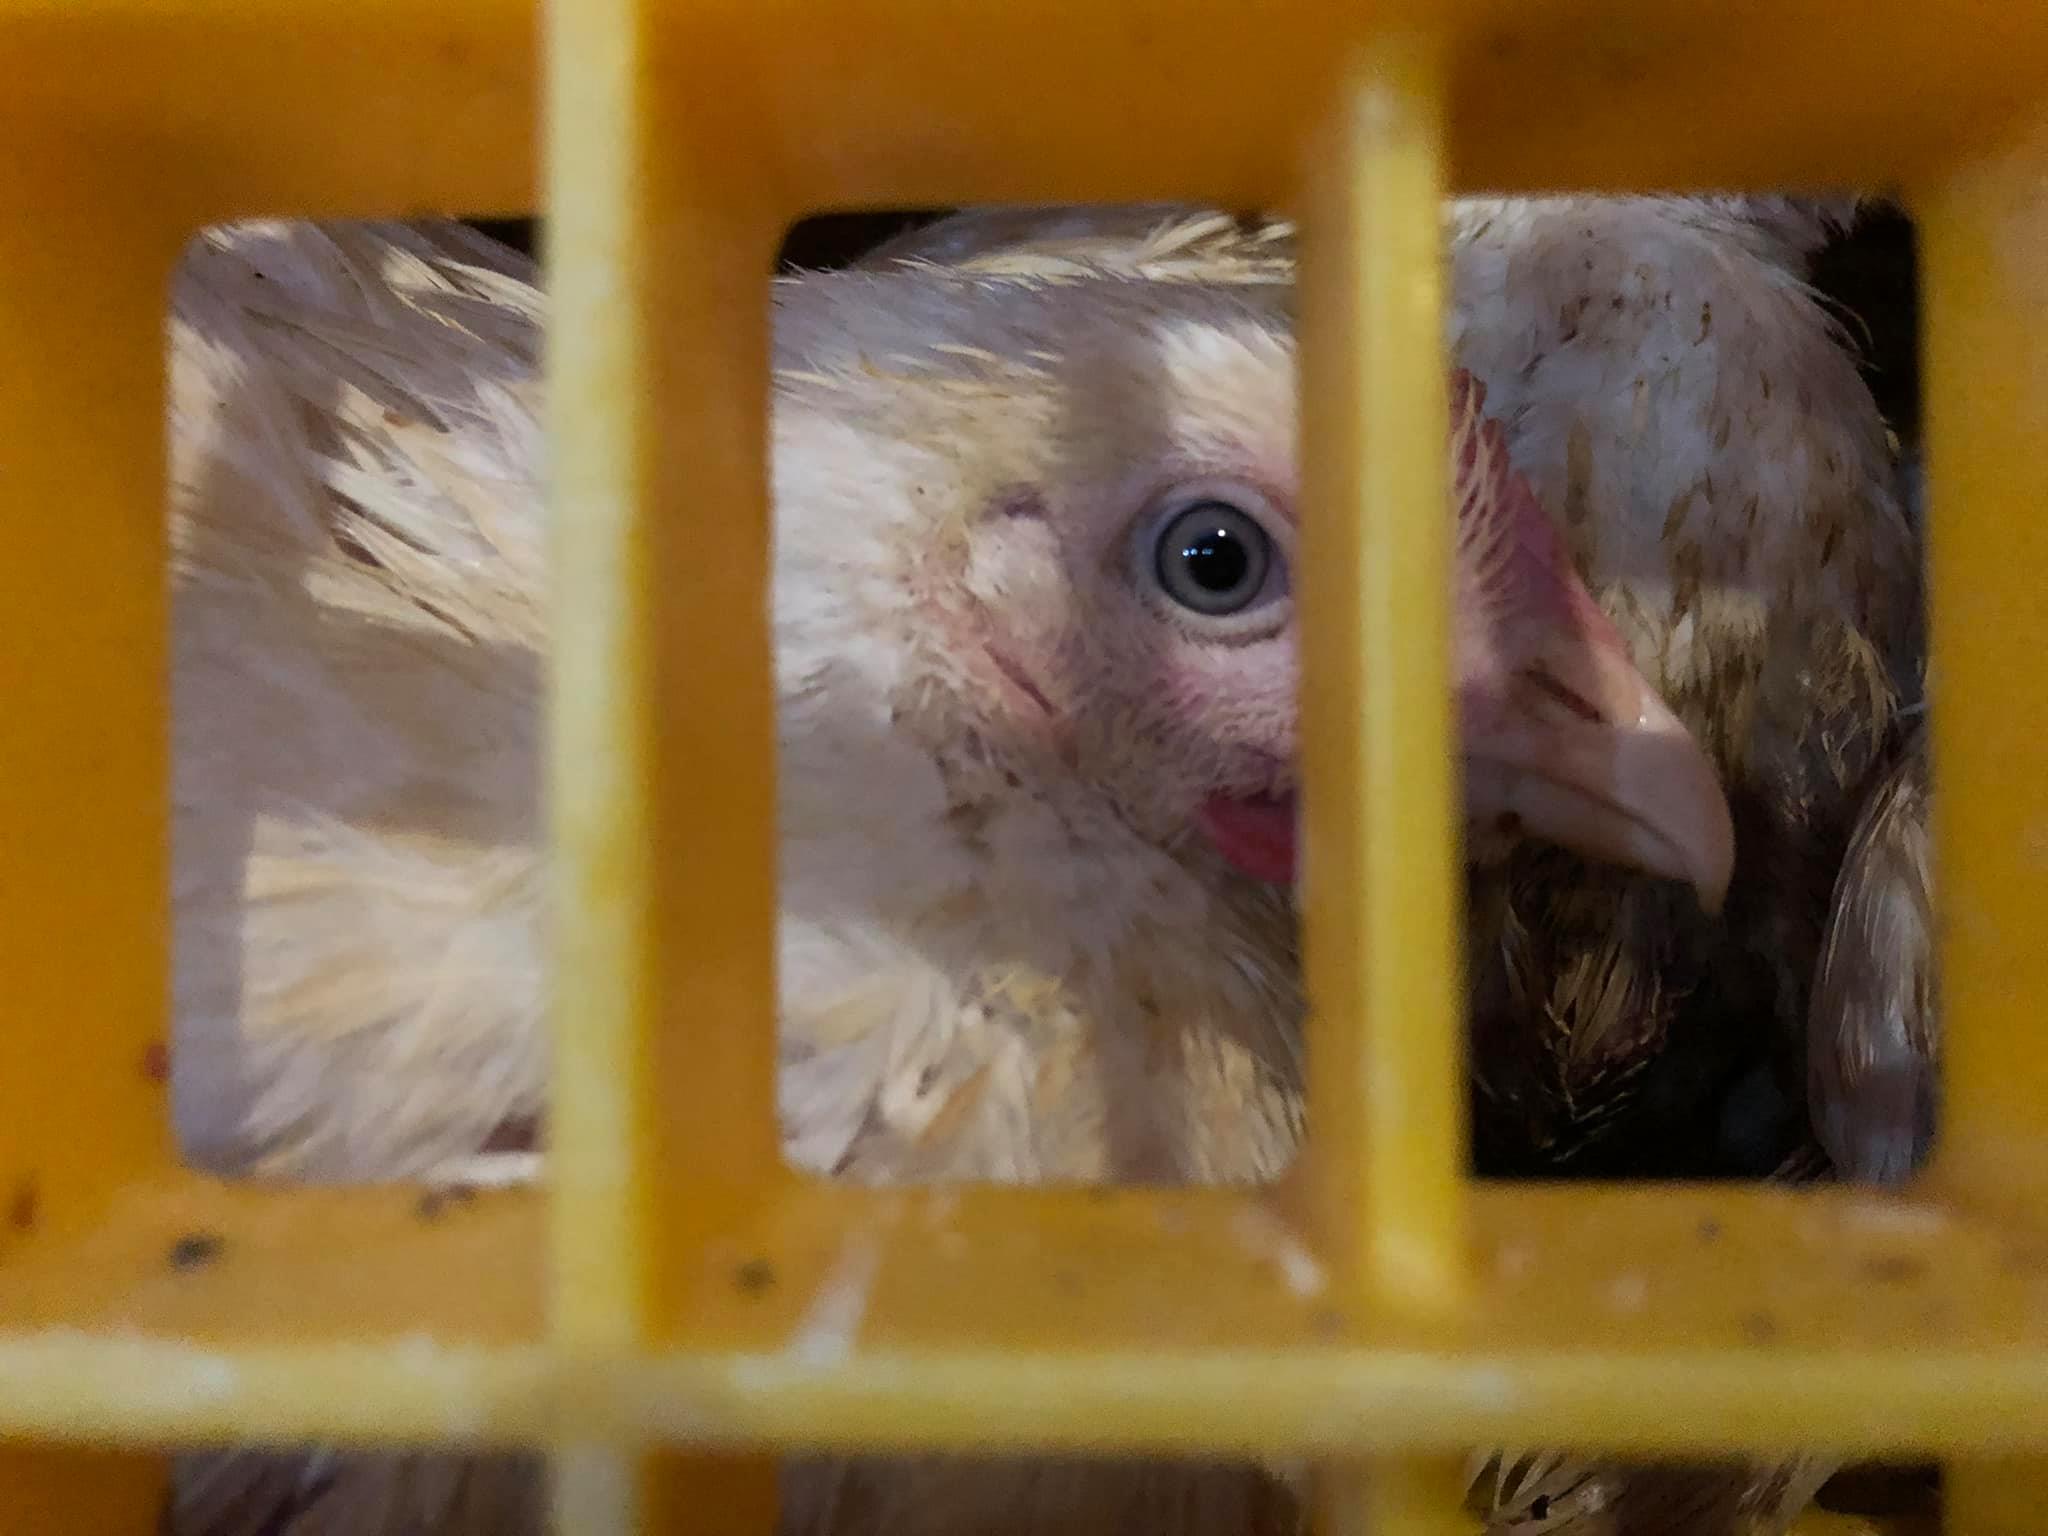 Photo of a white chicken, eye clearly visible looking through its yellow plastic cage at the camera whilst in cramped conditions with other chickens